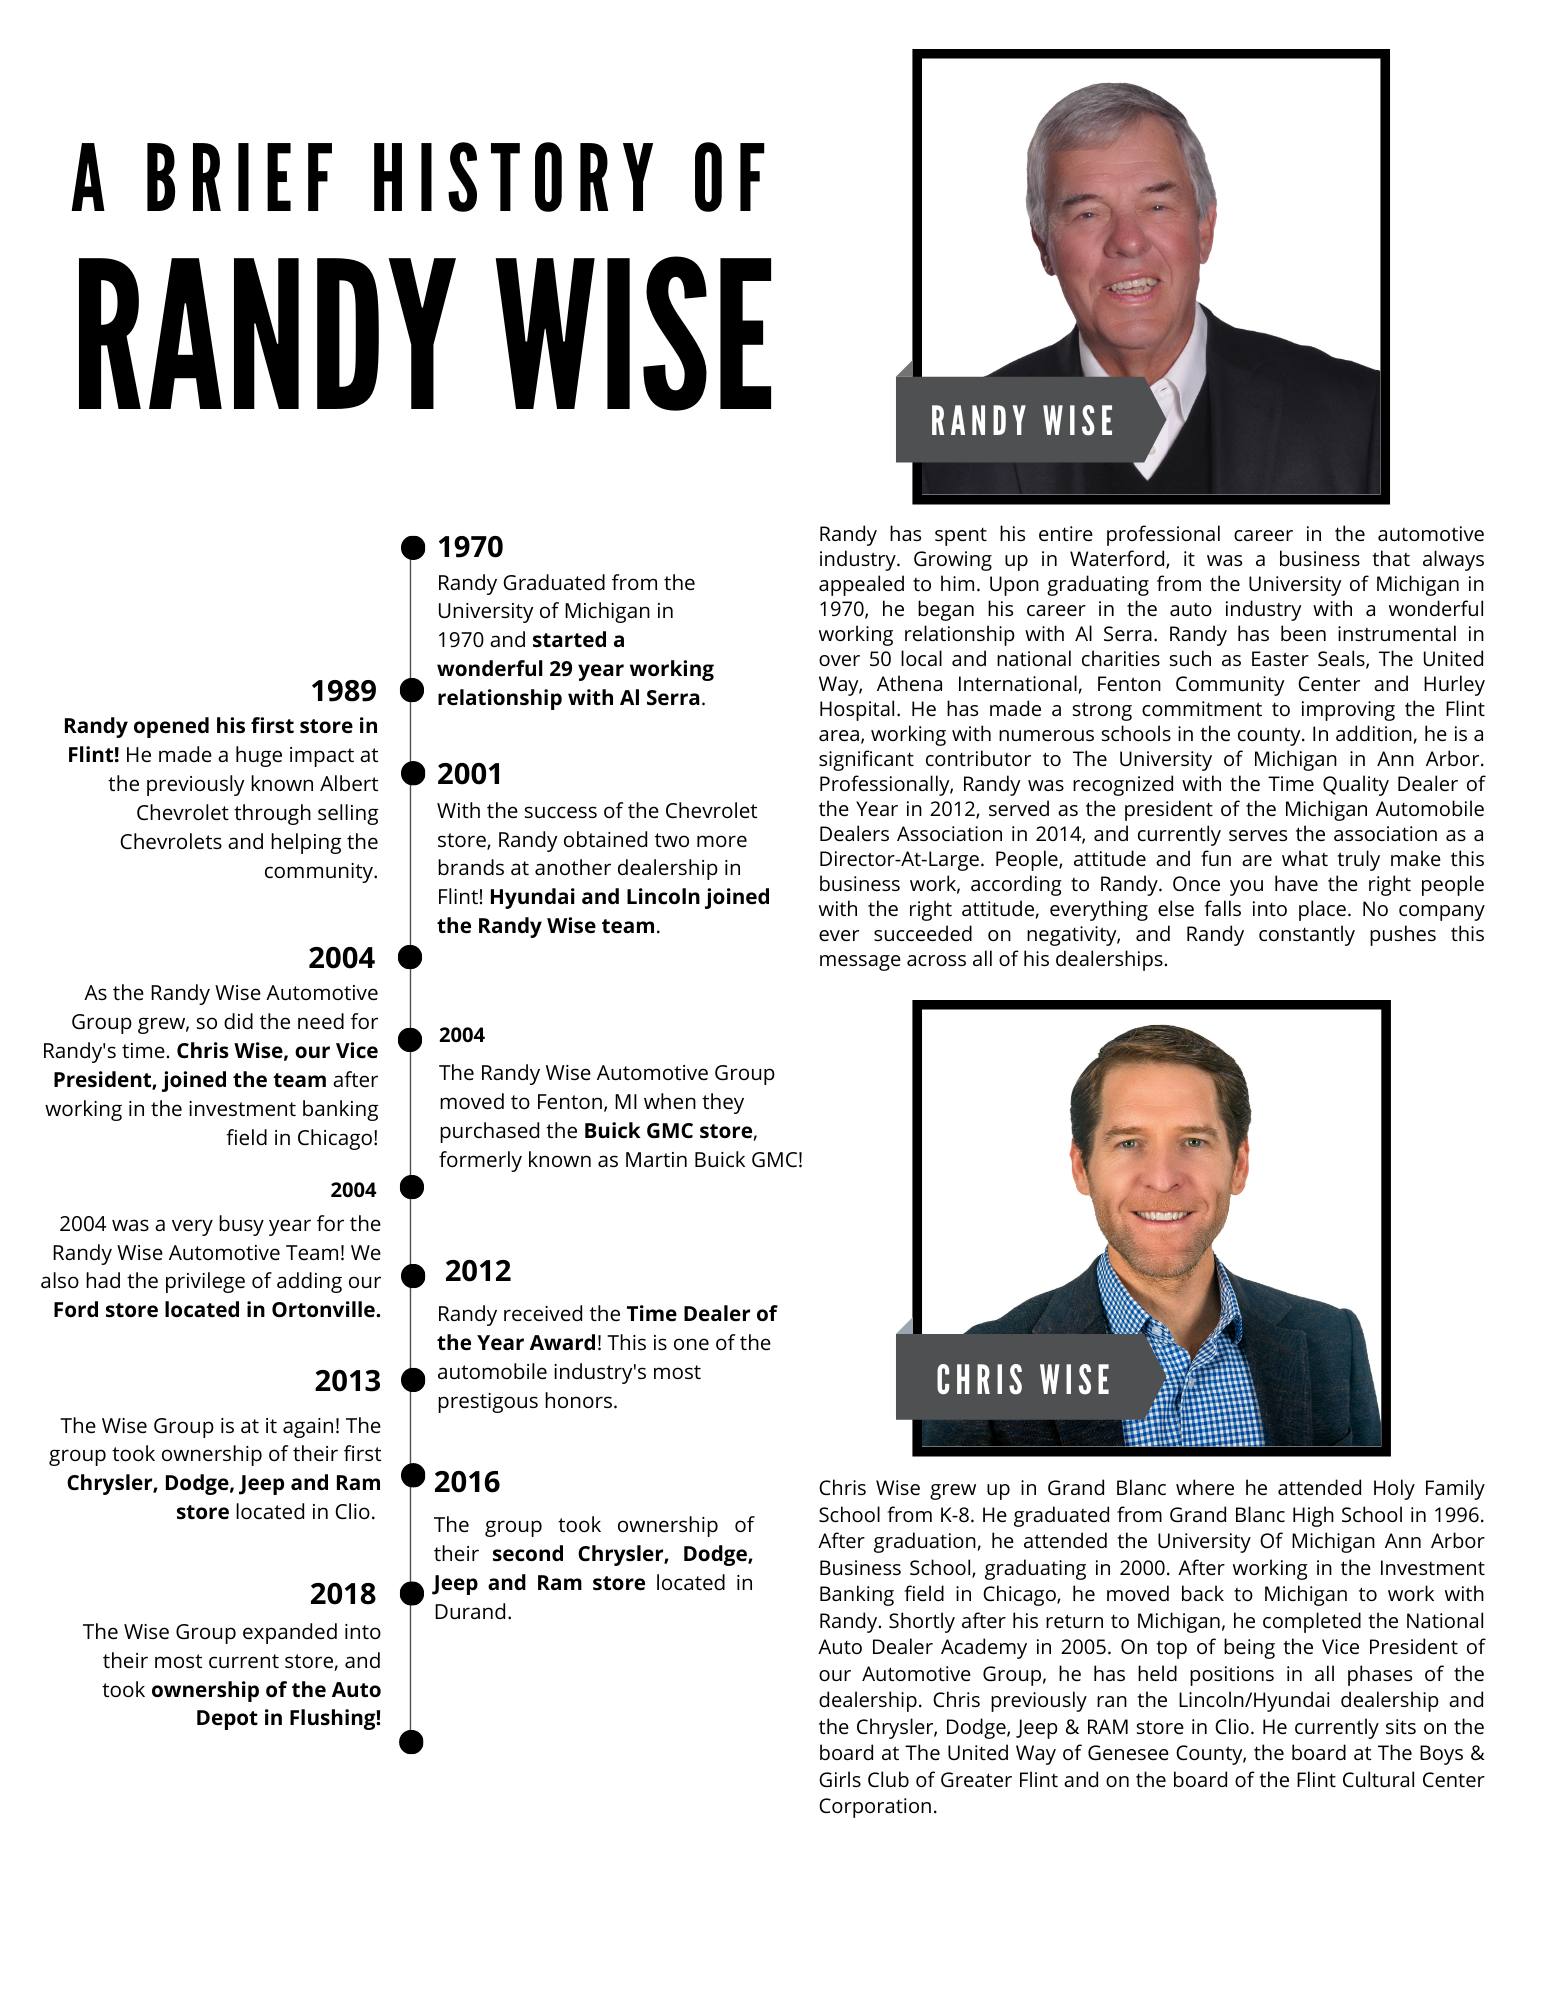 Randy Wise's history